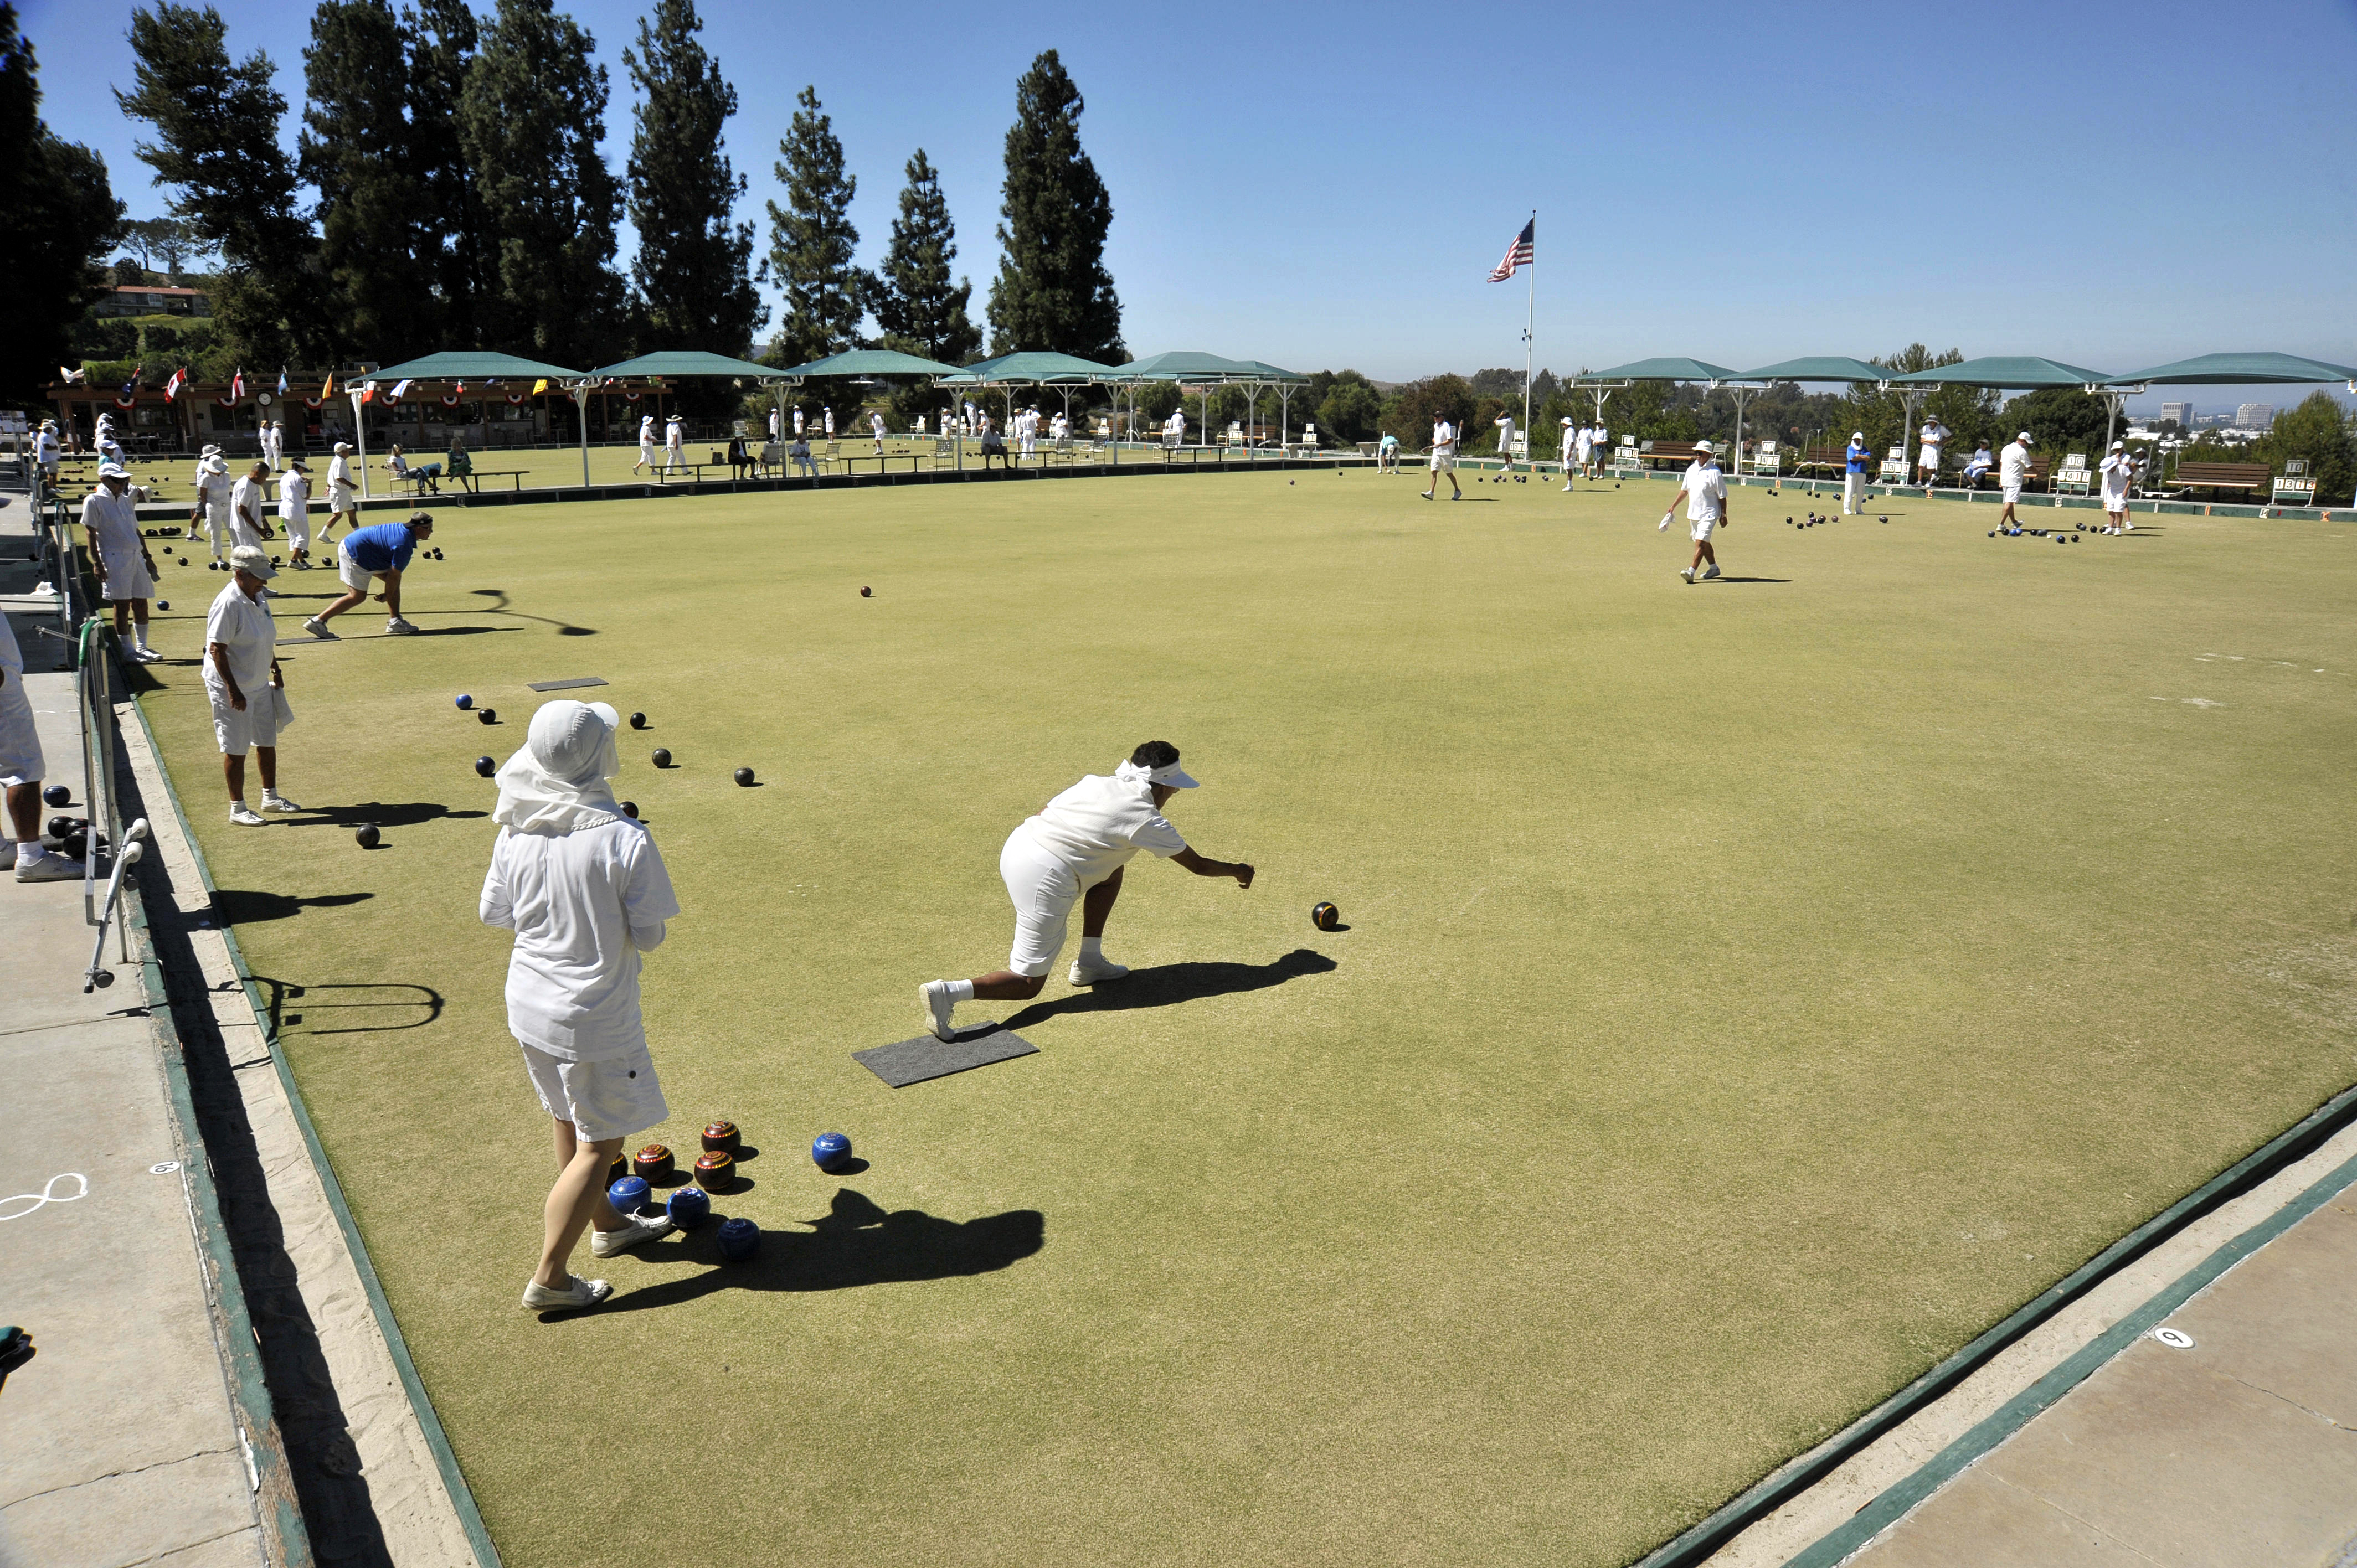 Lawn bowlers, from Laguna Woods and around Southern California, compete in a tournament at Clubhouse 2 on Sunday afternoon.